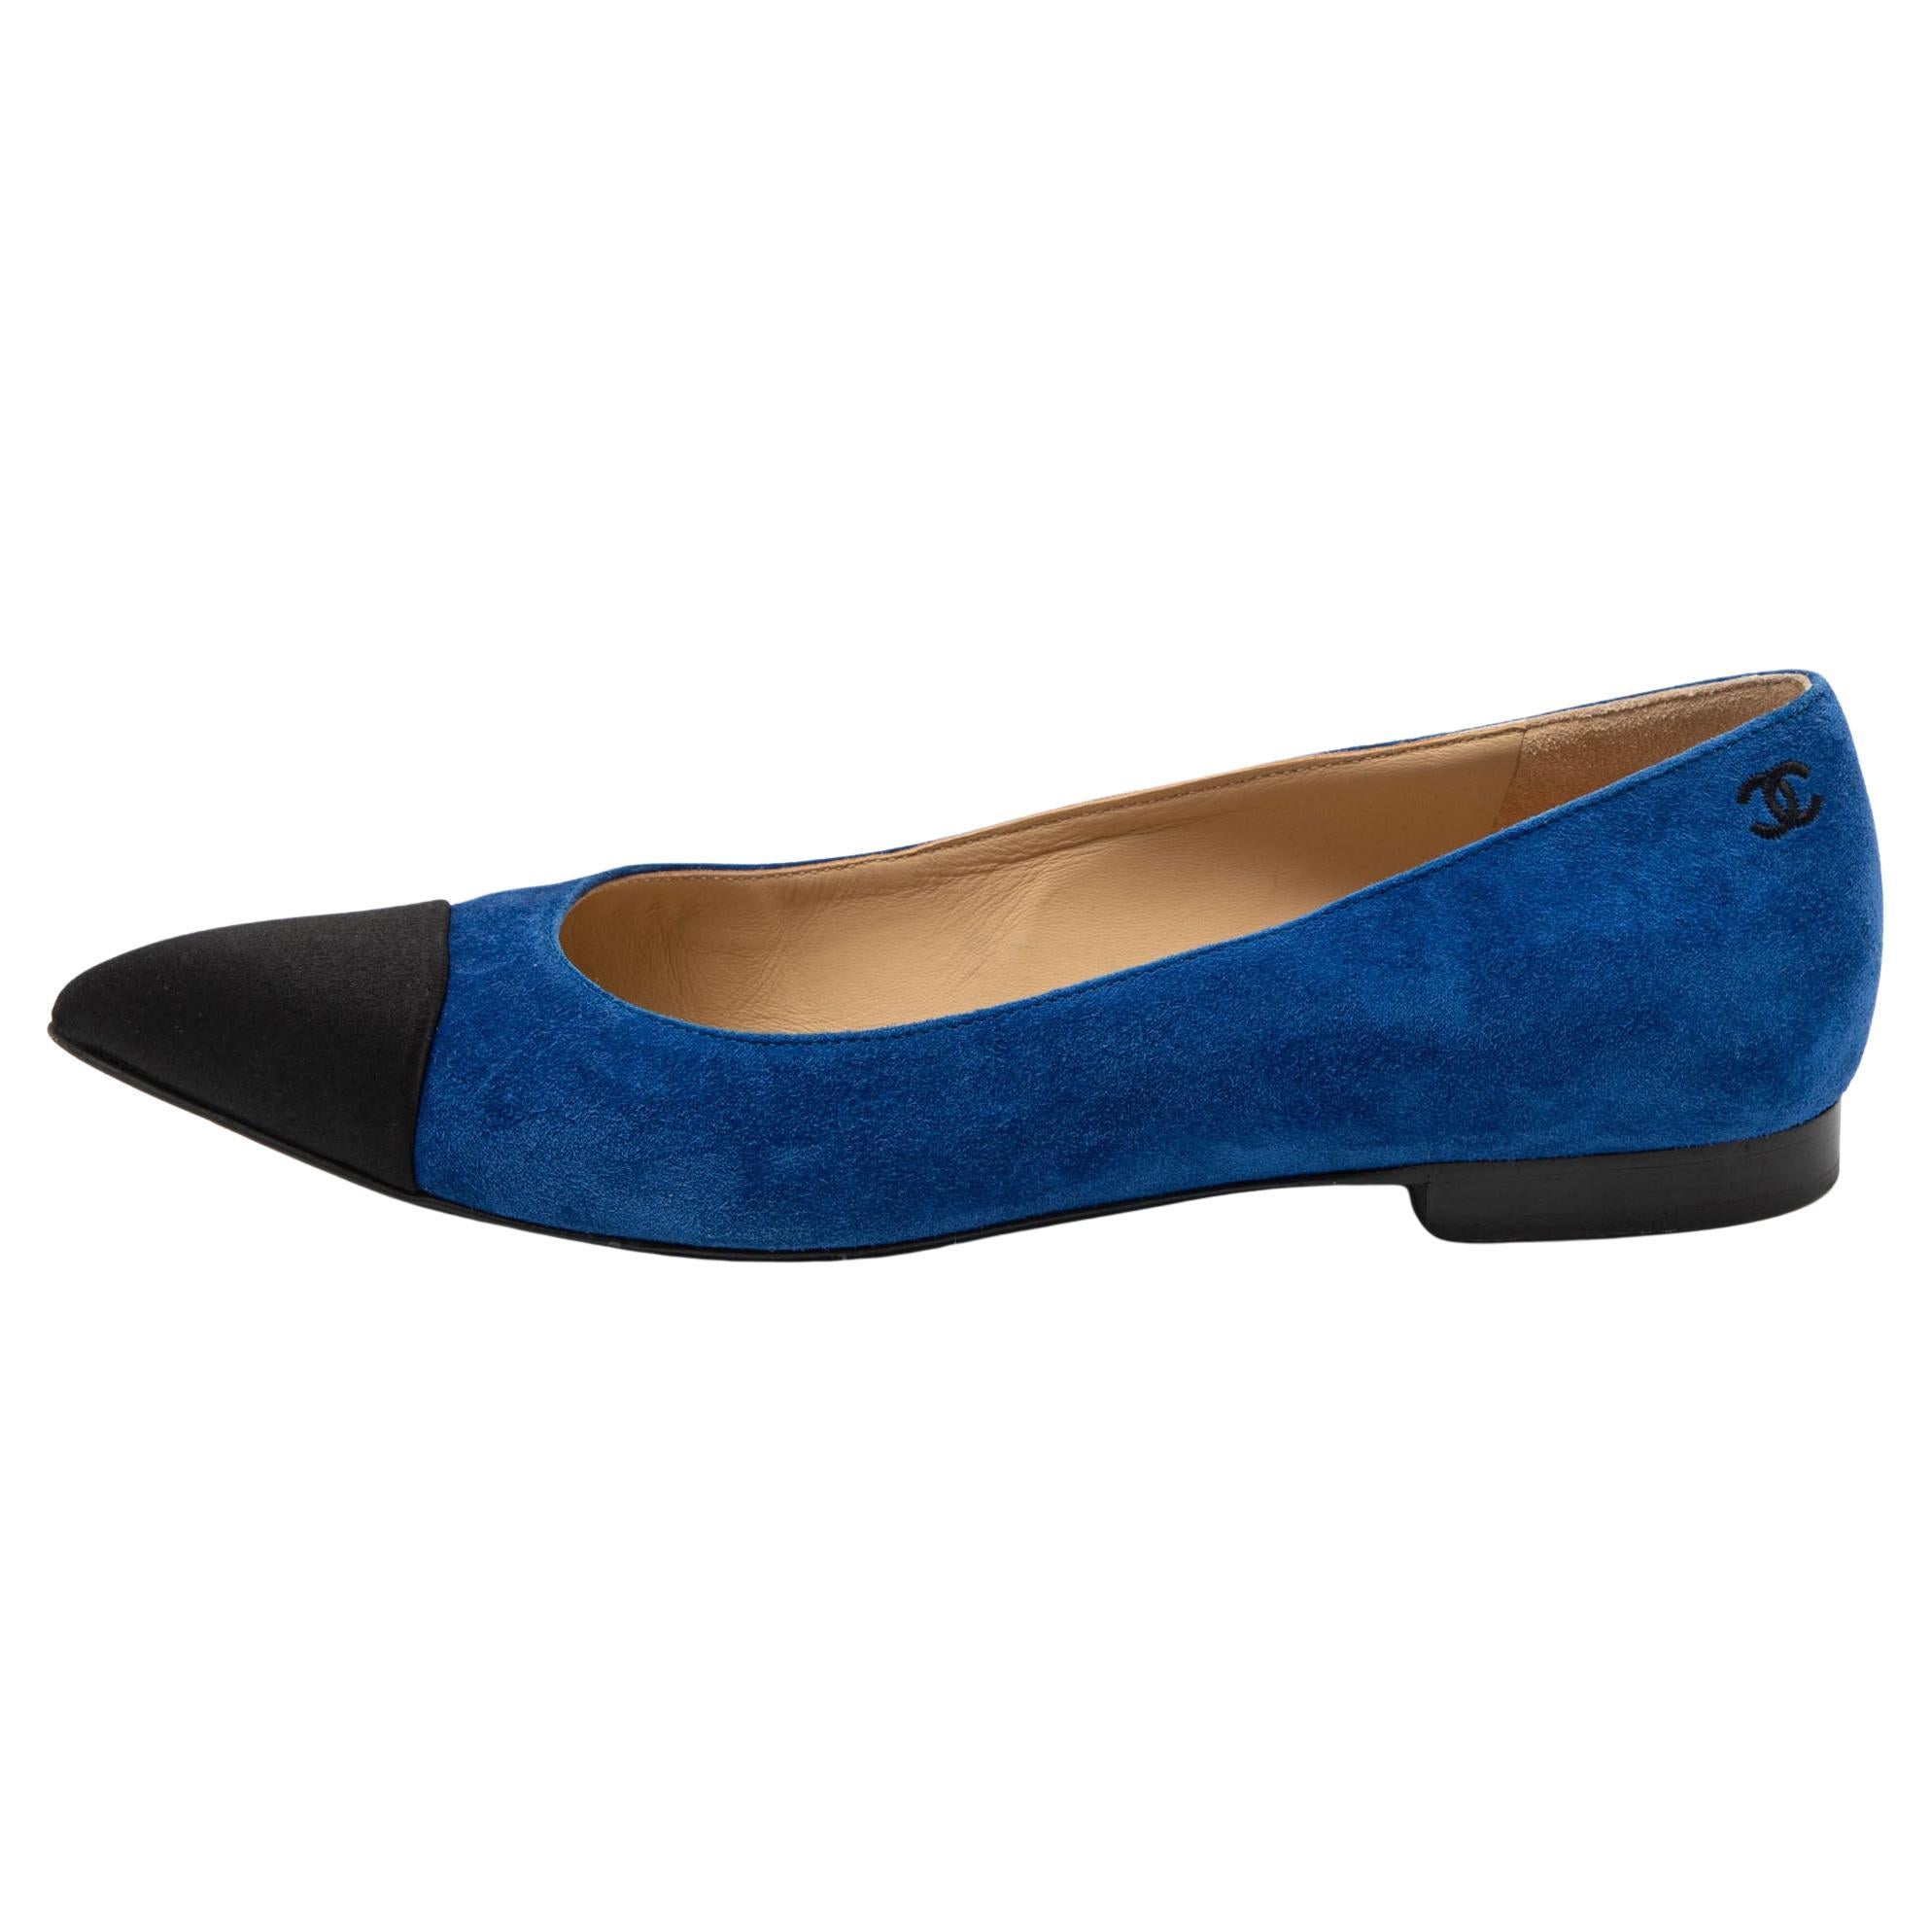 Chanel Blue/Black Satin and Suede Pointed Toe Gabrielle Ballerina Flats Size 37